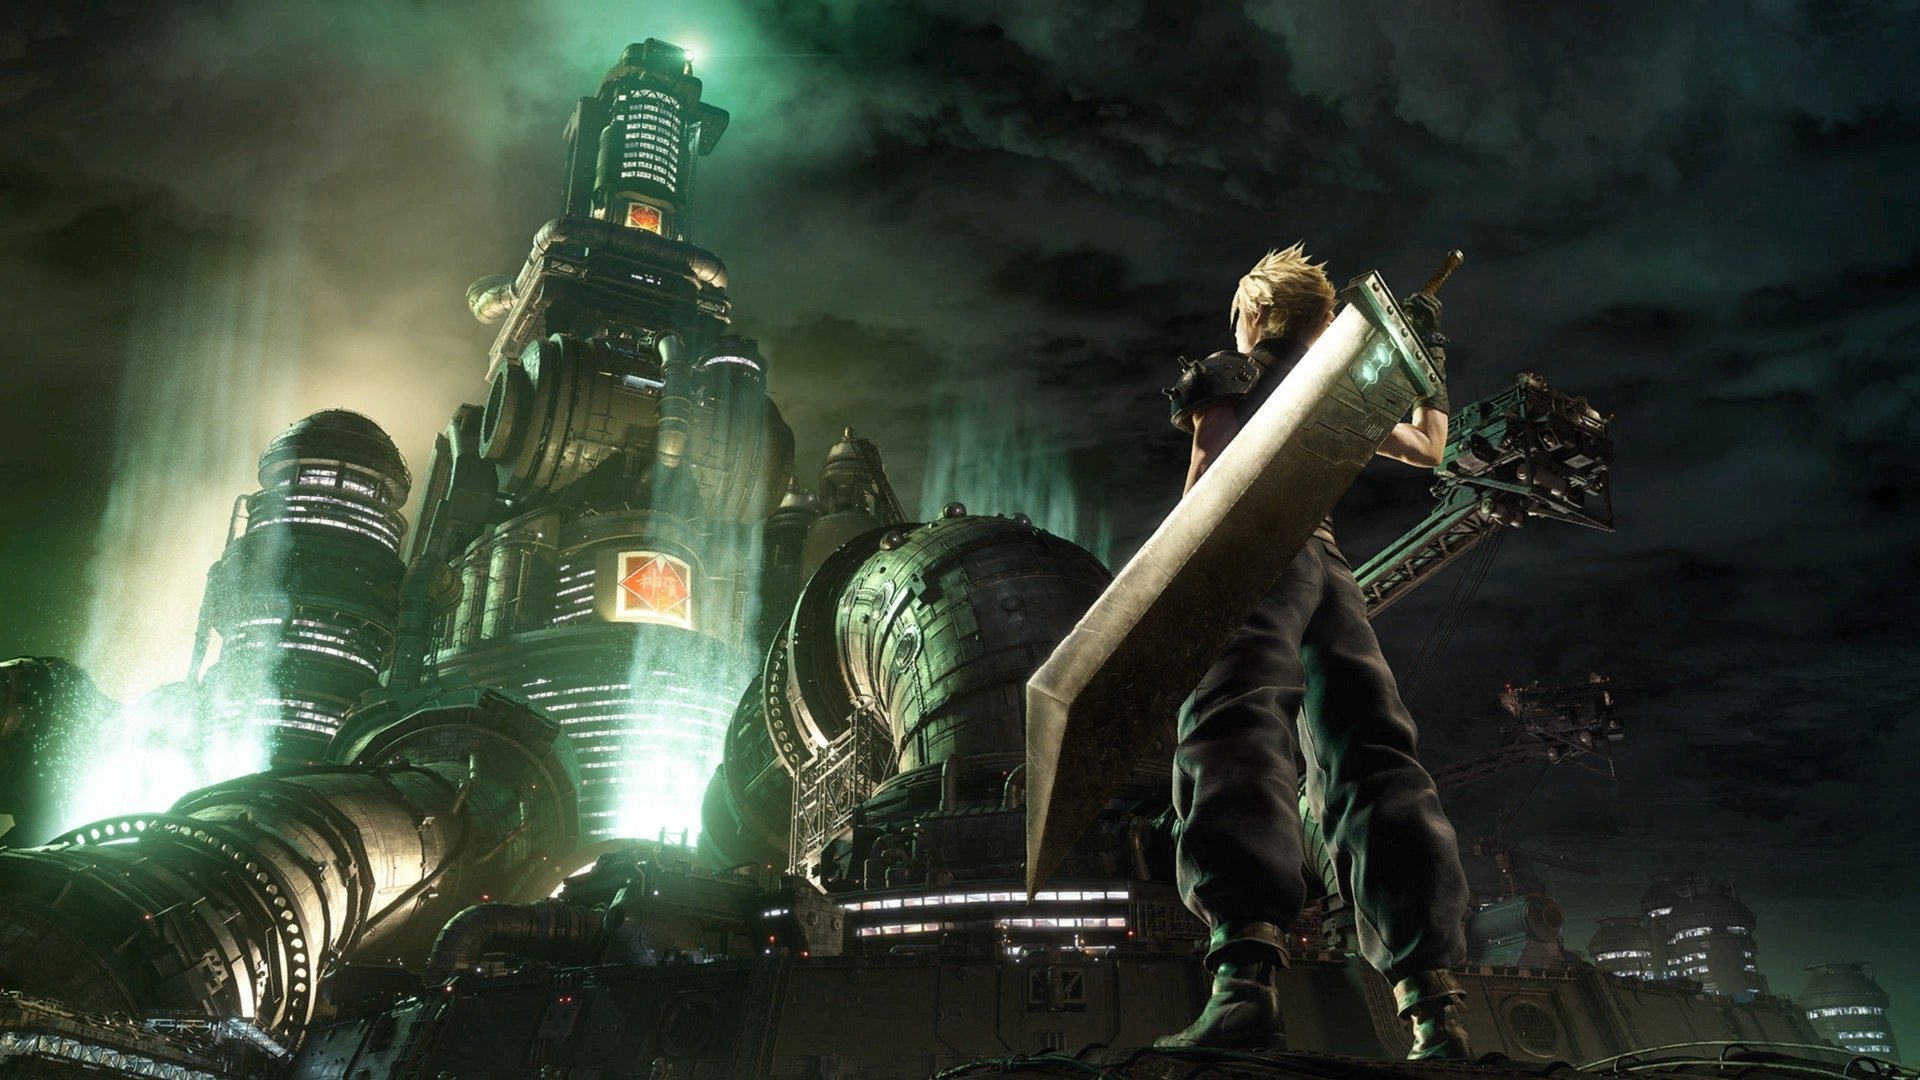 Final Fantasy 7 Remake on PC review: it just about gets the job